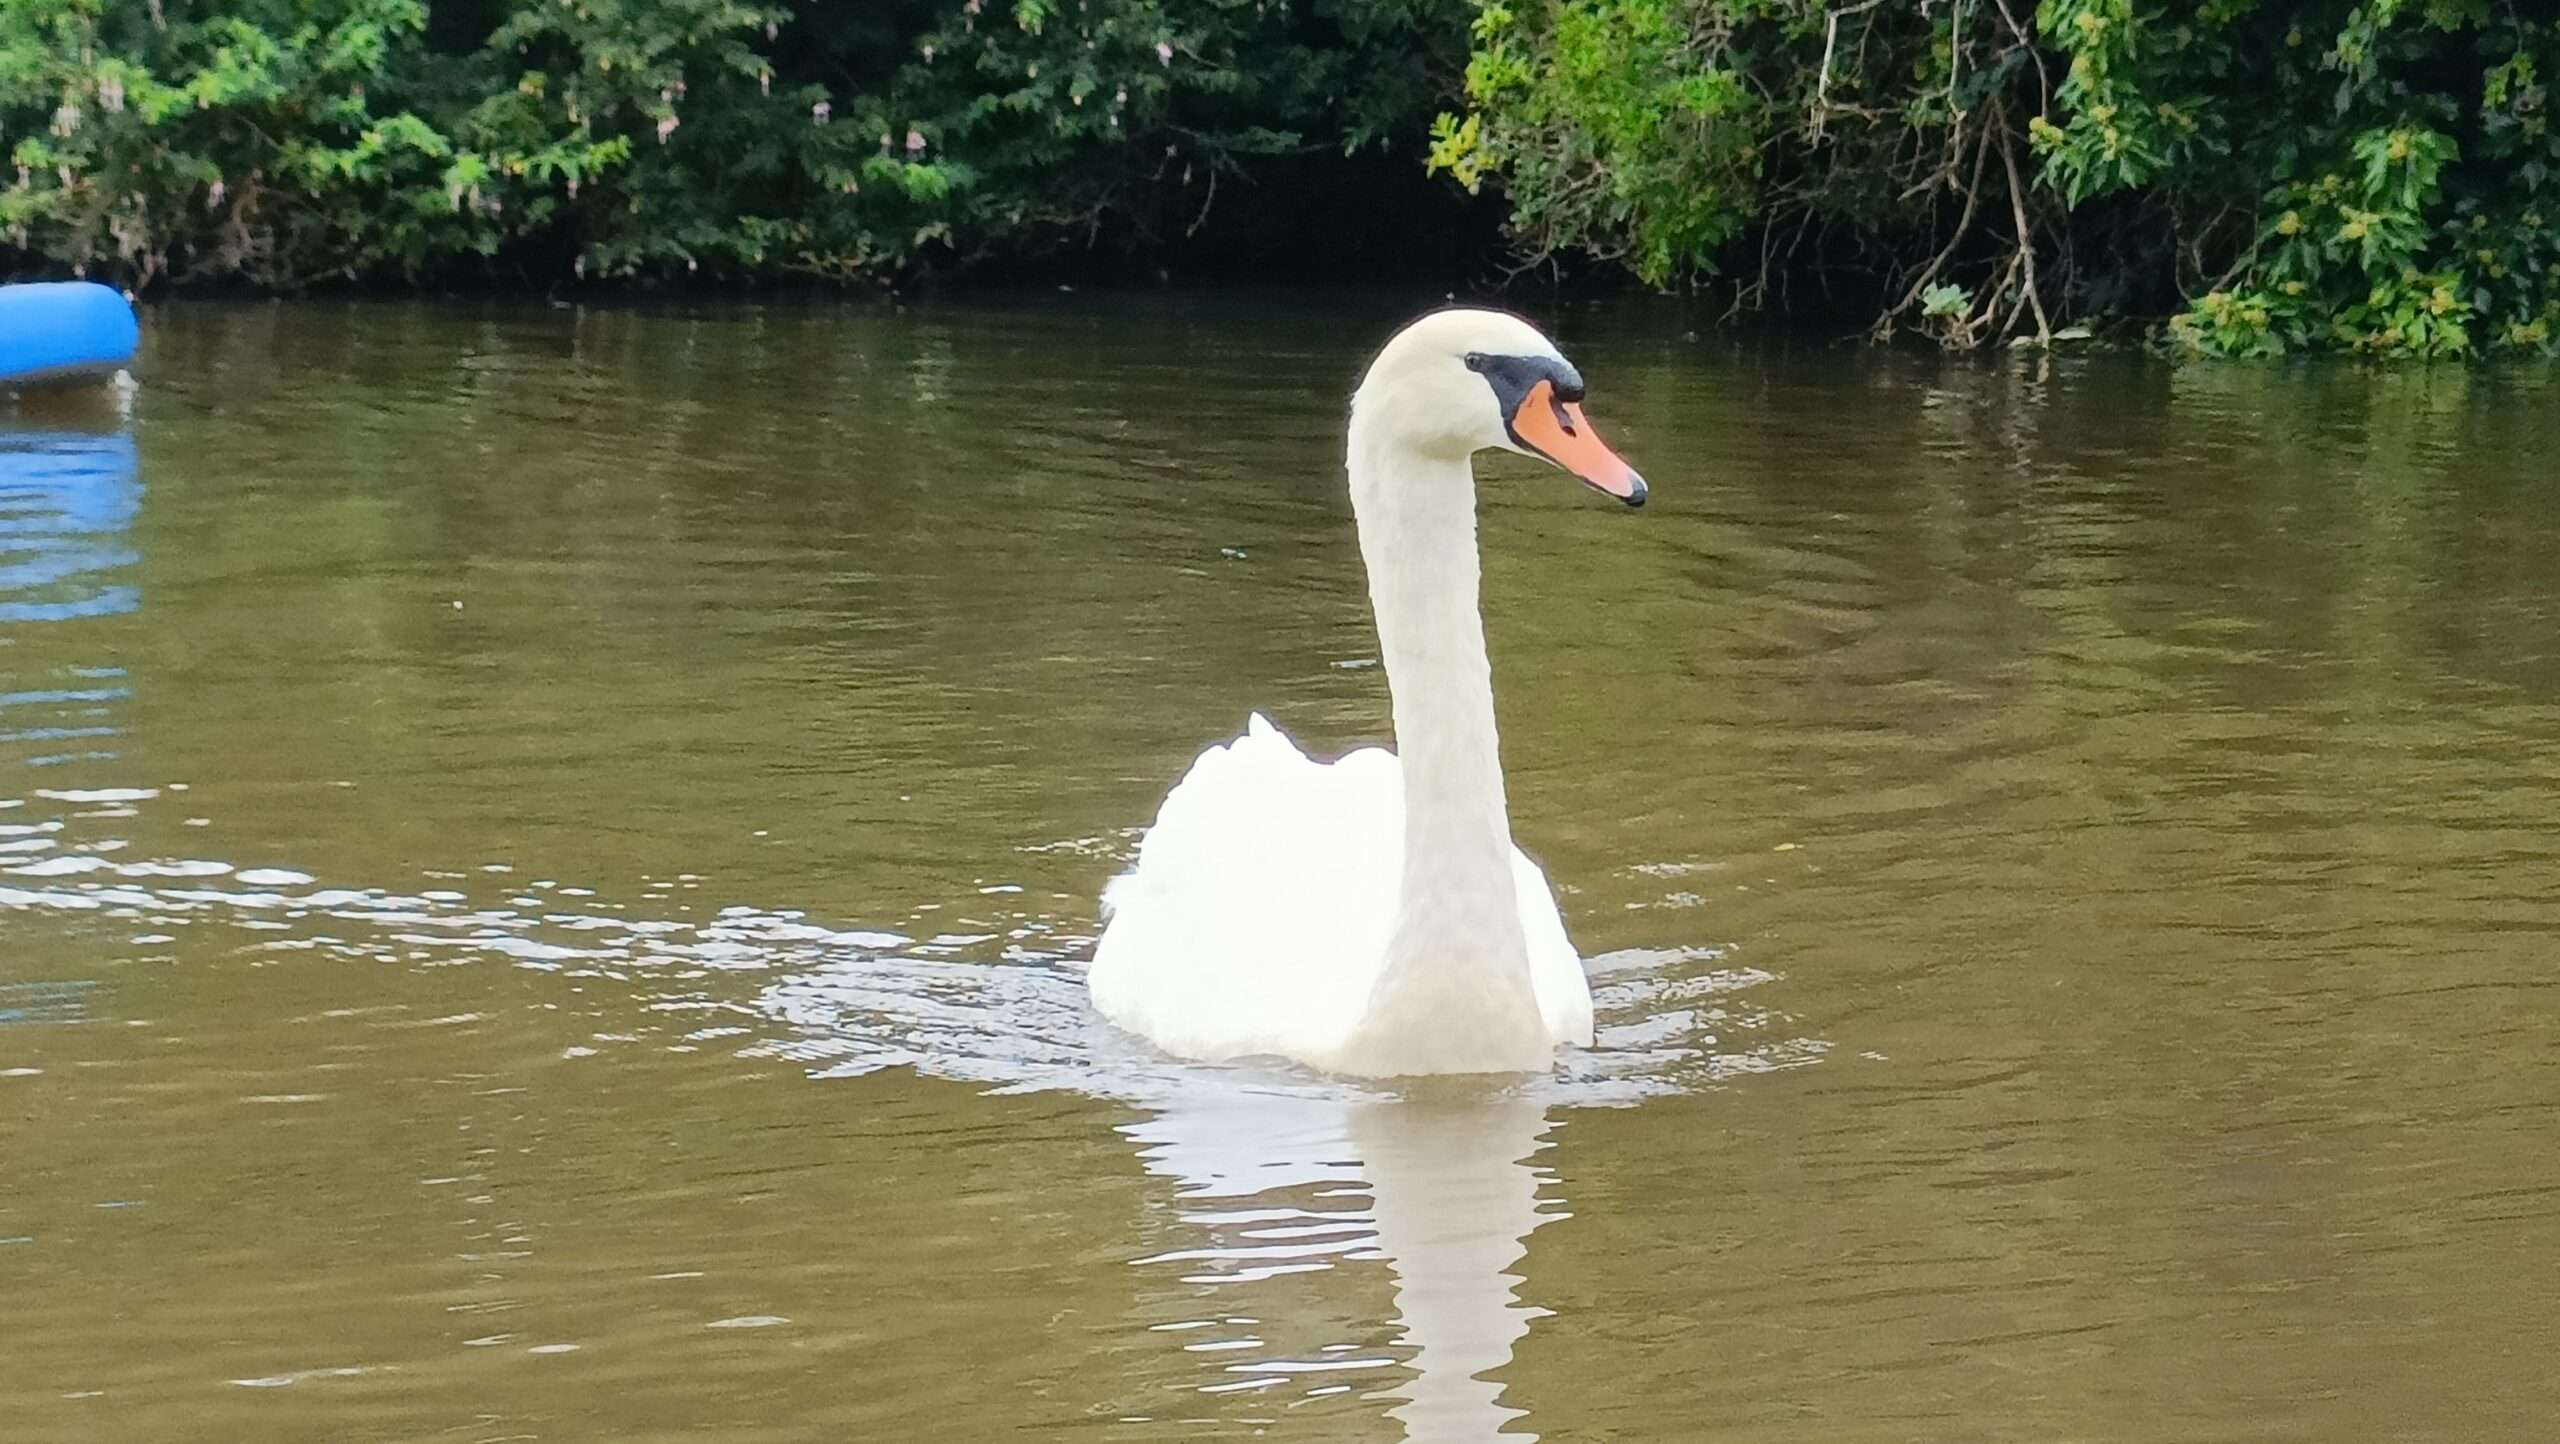 Council concerned over unexplained deaths of Mute Swans and wild ducks